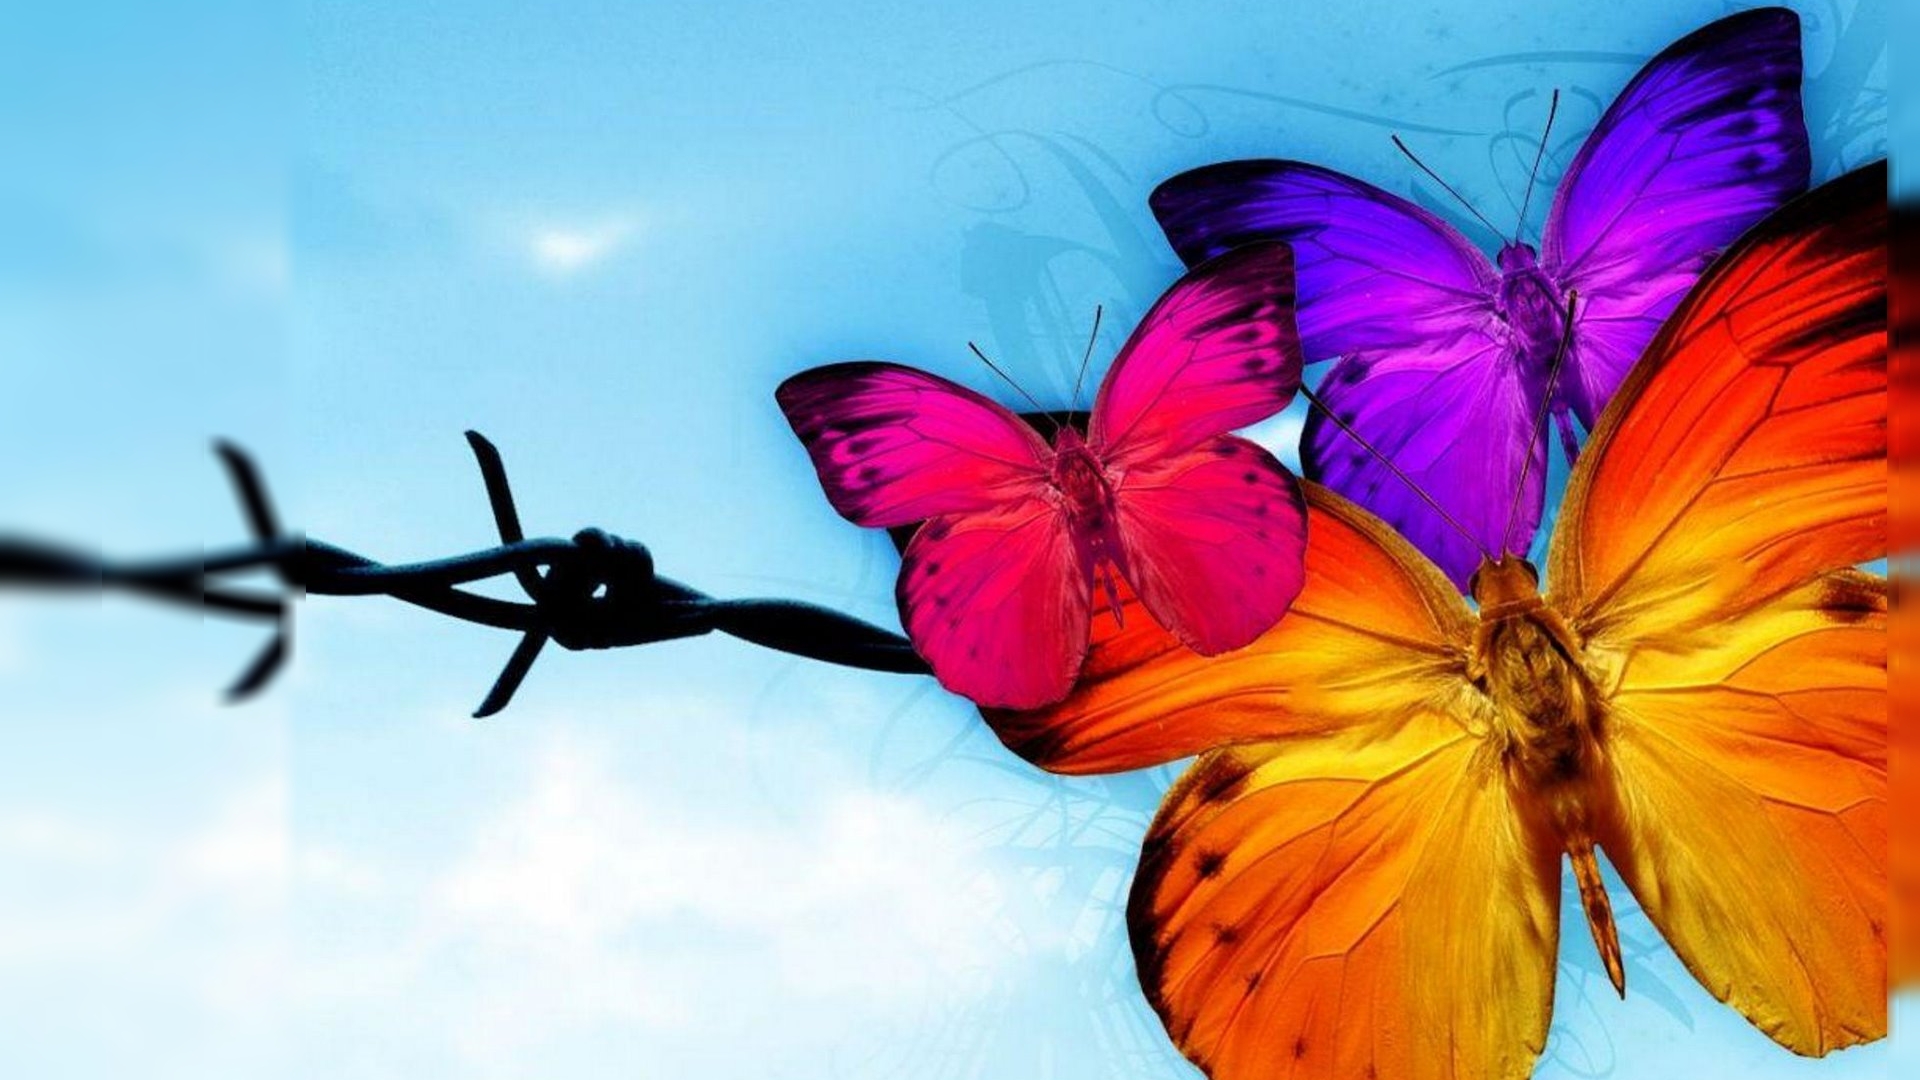 Butterfly Images Hd Free Download - HD Wallpaper 